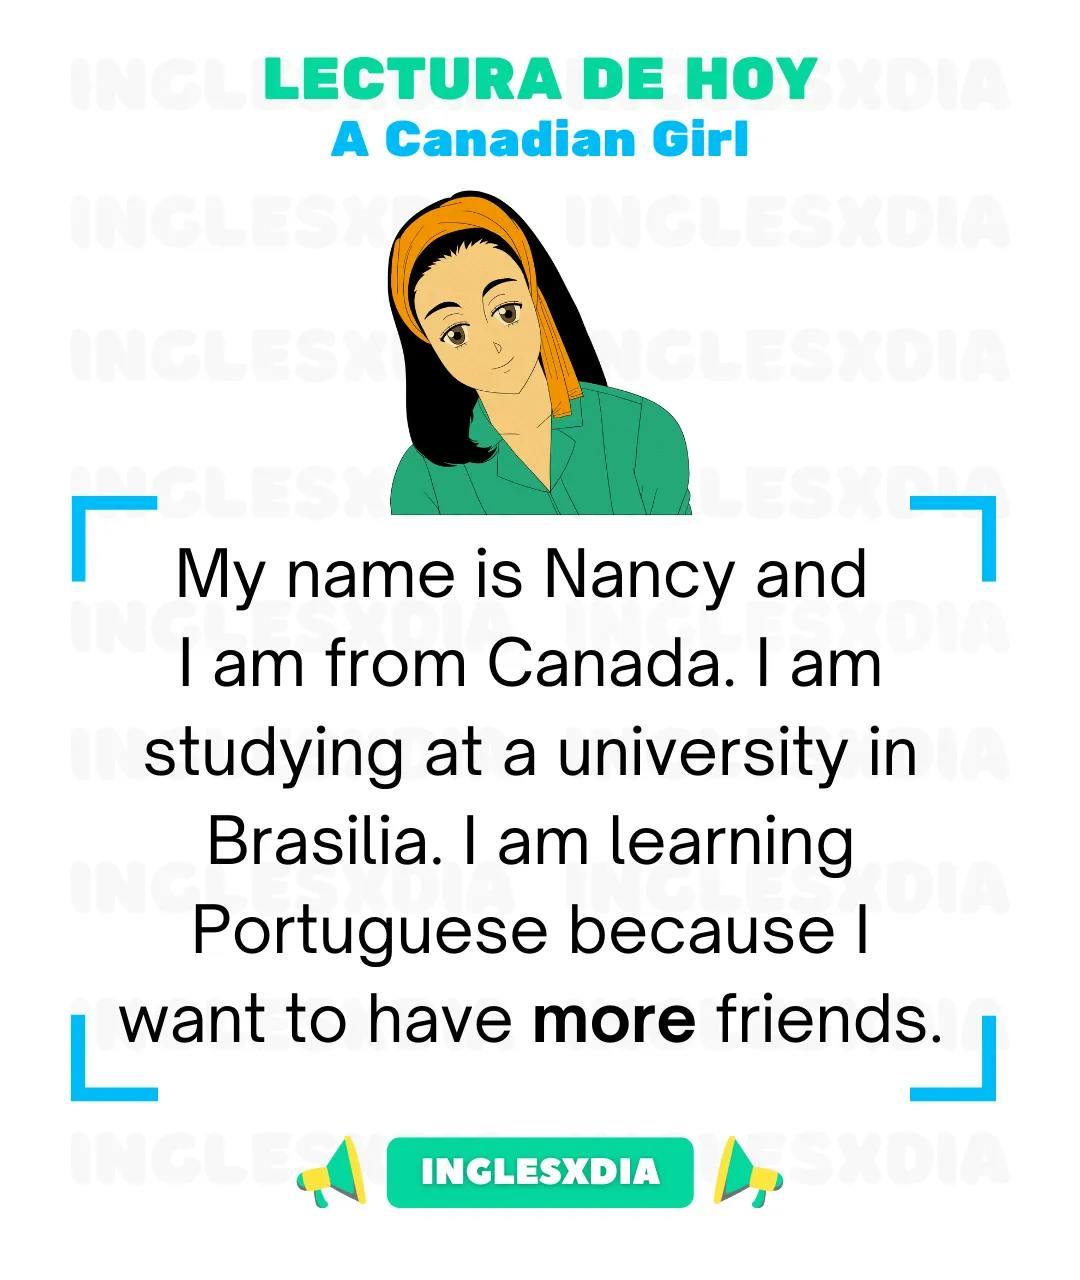 A Canadian Girl